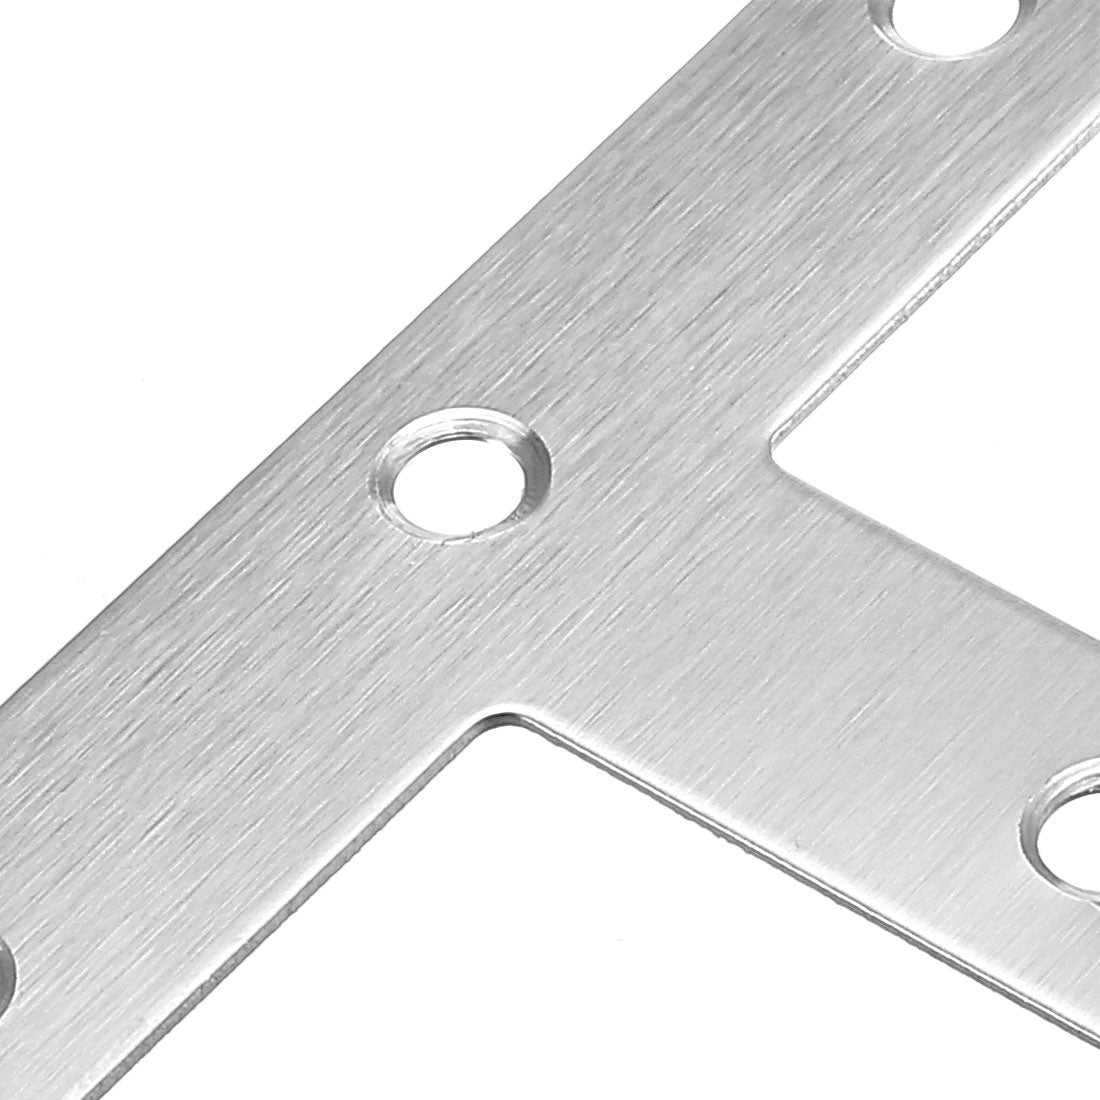 uxcell Uxcell Flat T Shape Repair Mending Plate, 80mmx80mm, Stainless steel Joining Bracket Support Brace, 10pcs